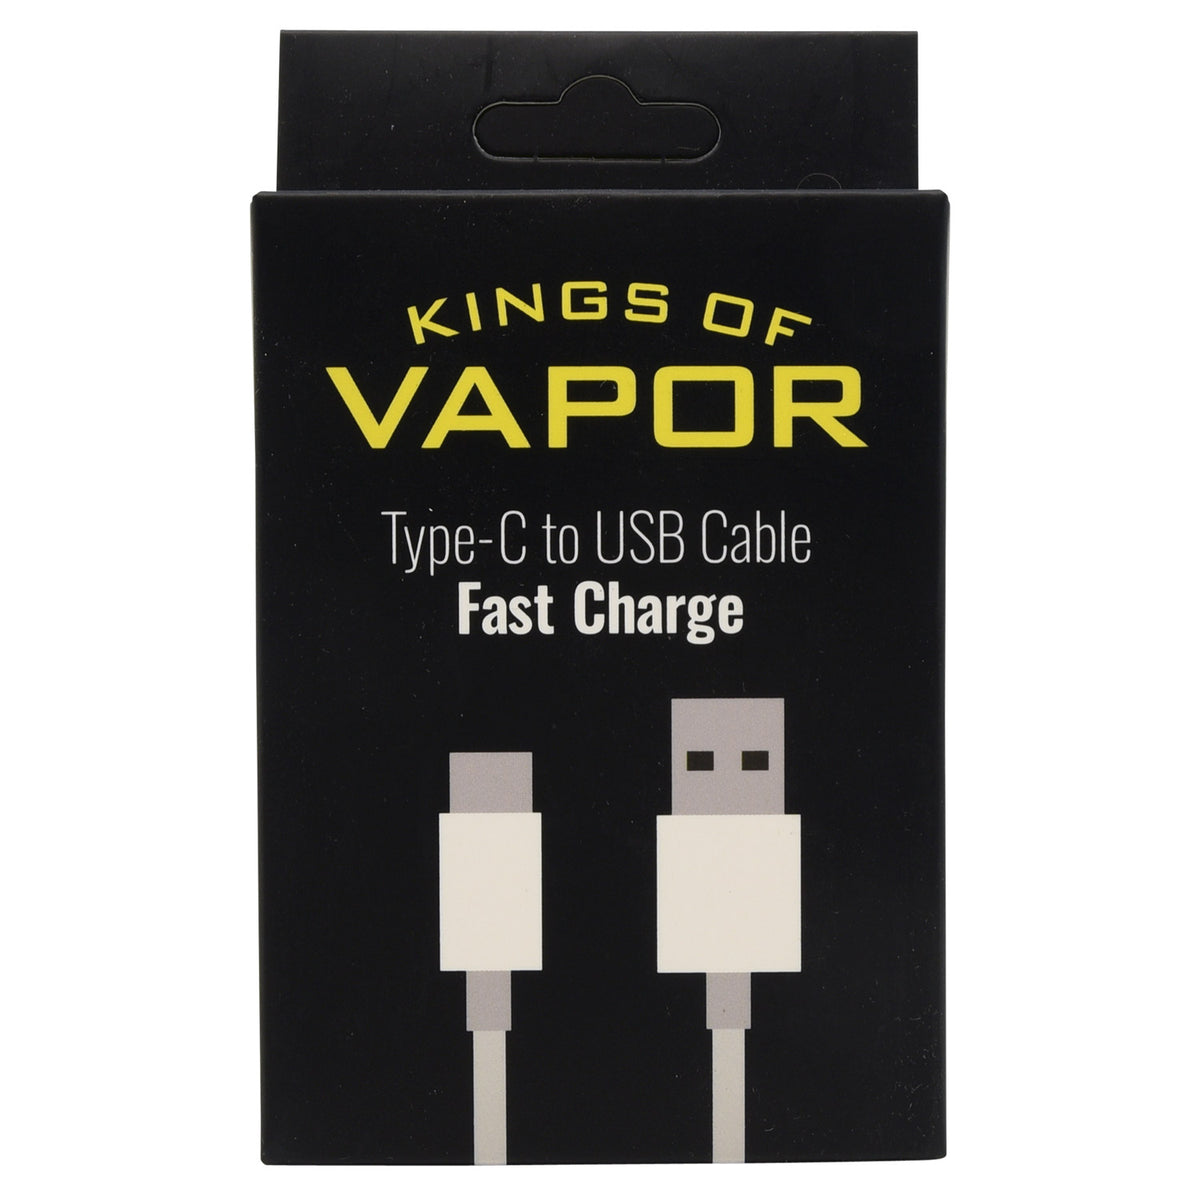 Kings of Vapor Charging Cable Type-C to USB